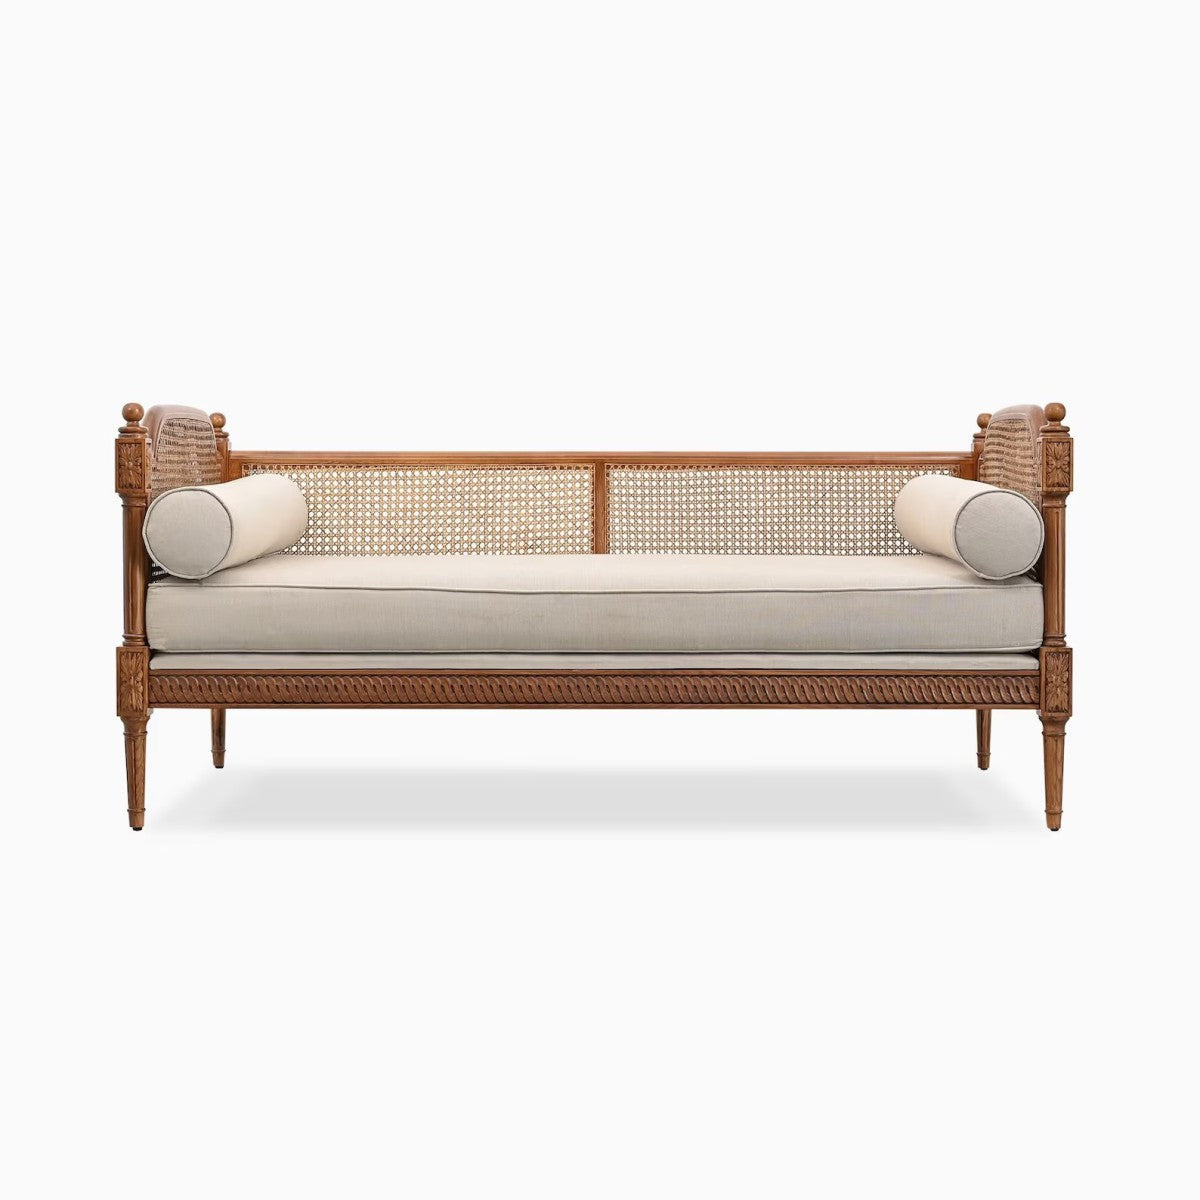 Springfield —   Diwan ( DayBed )